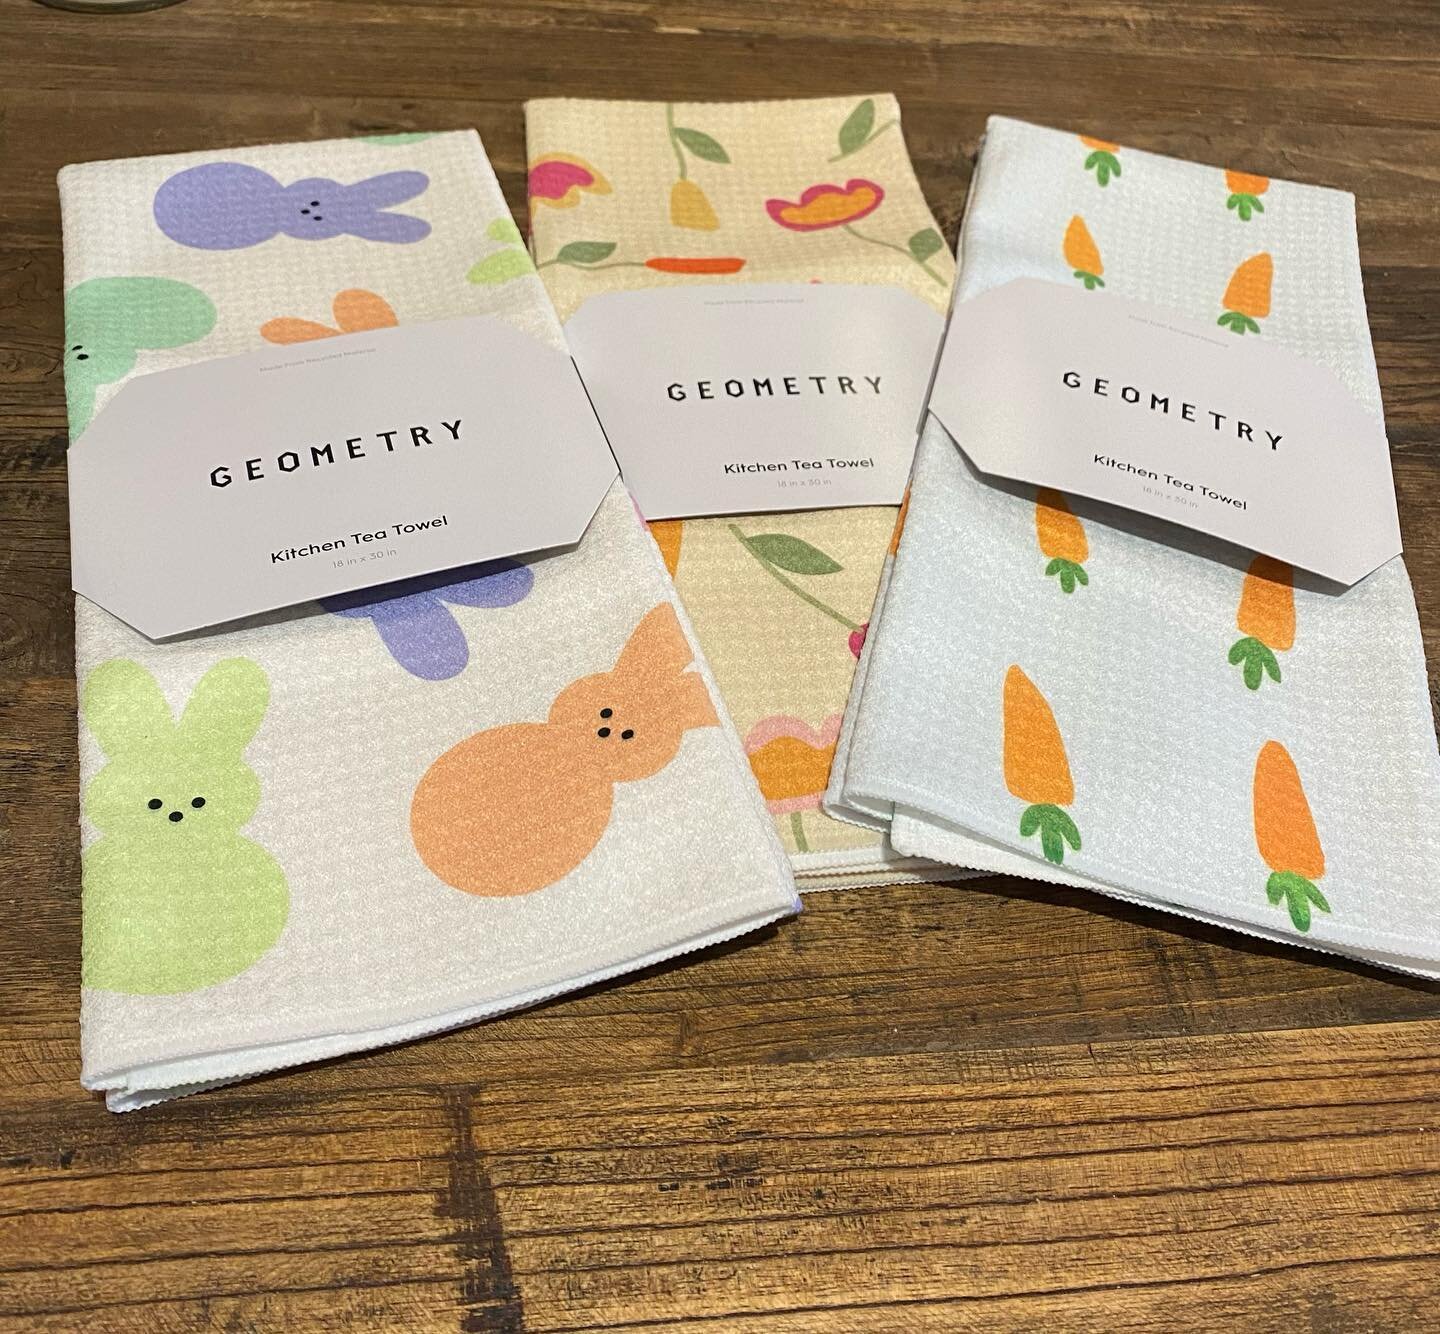 My FAVORITE kitchen towels are back in stock!

New SPRING styles to choose from.

Stop by 10-4 today and get ready for your Easter gathering 🐣